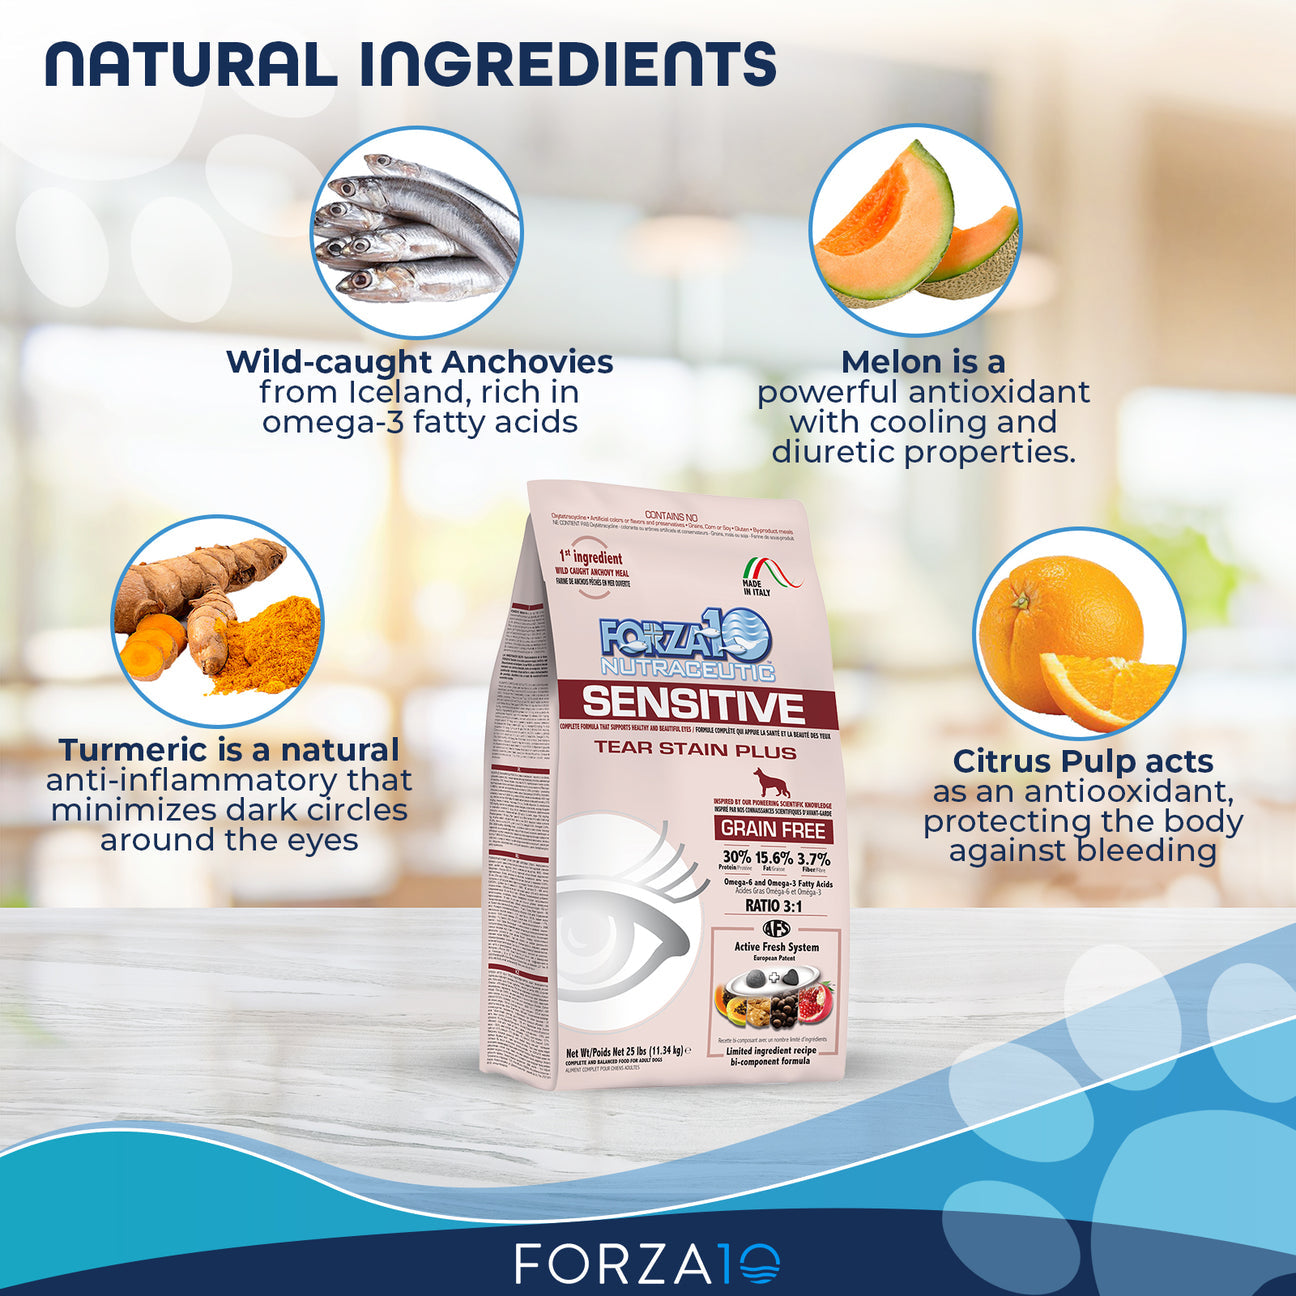 FORZA10 NUTRACEUTIC SENSITIVE TEAR STAIN PLUS GRAIN-FREE DRY DOG FOOD